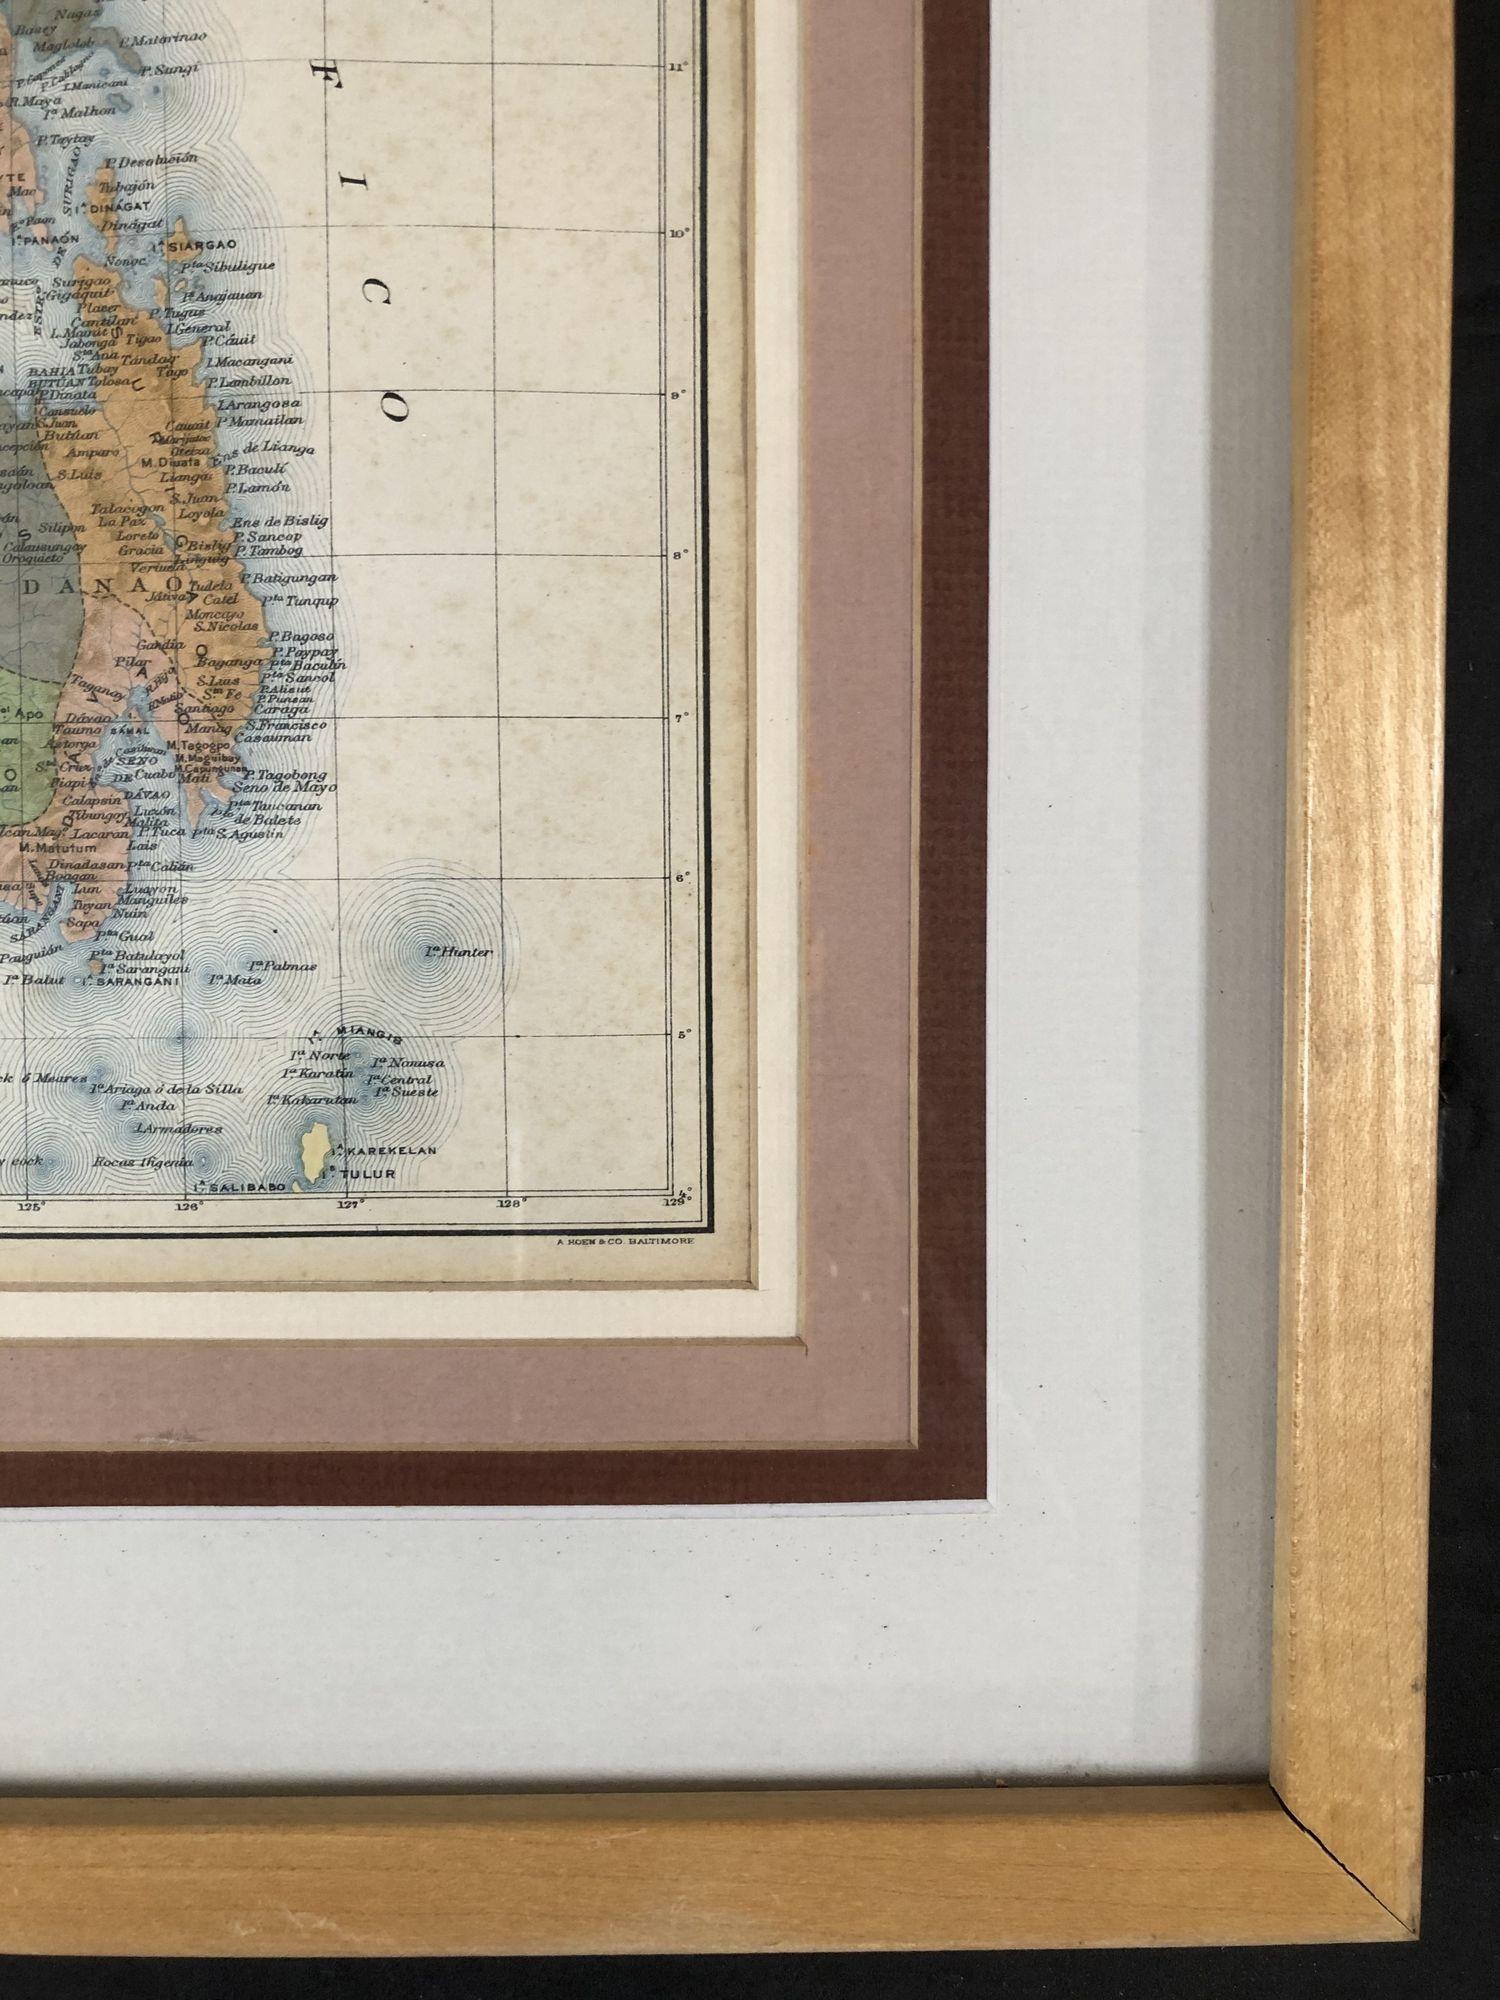 This vintage piece is a 1939 map of the Philippines accompanied by a census, sourced from Volume V of a book containing historical statistical information. Encased in a stylish black and gold frame, it exudes an air of elegance and importance. The